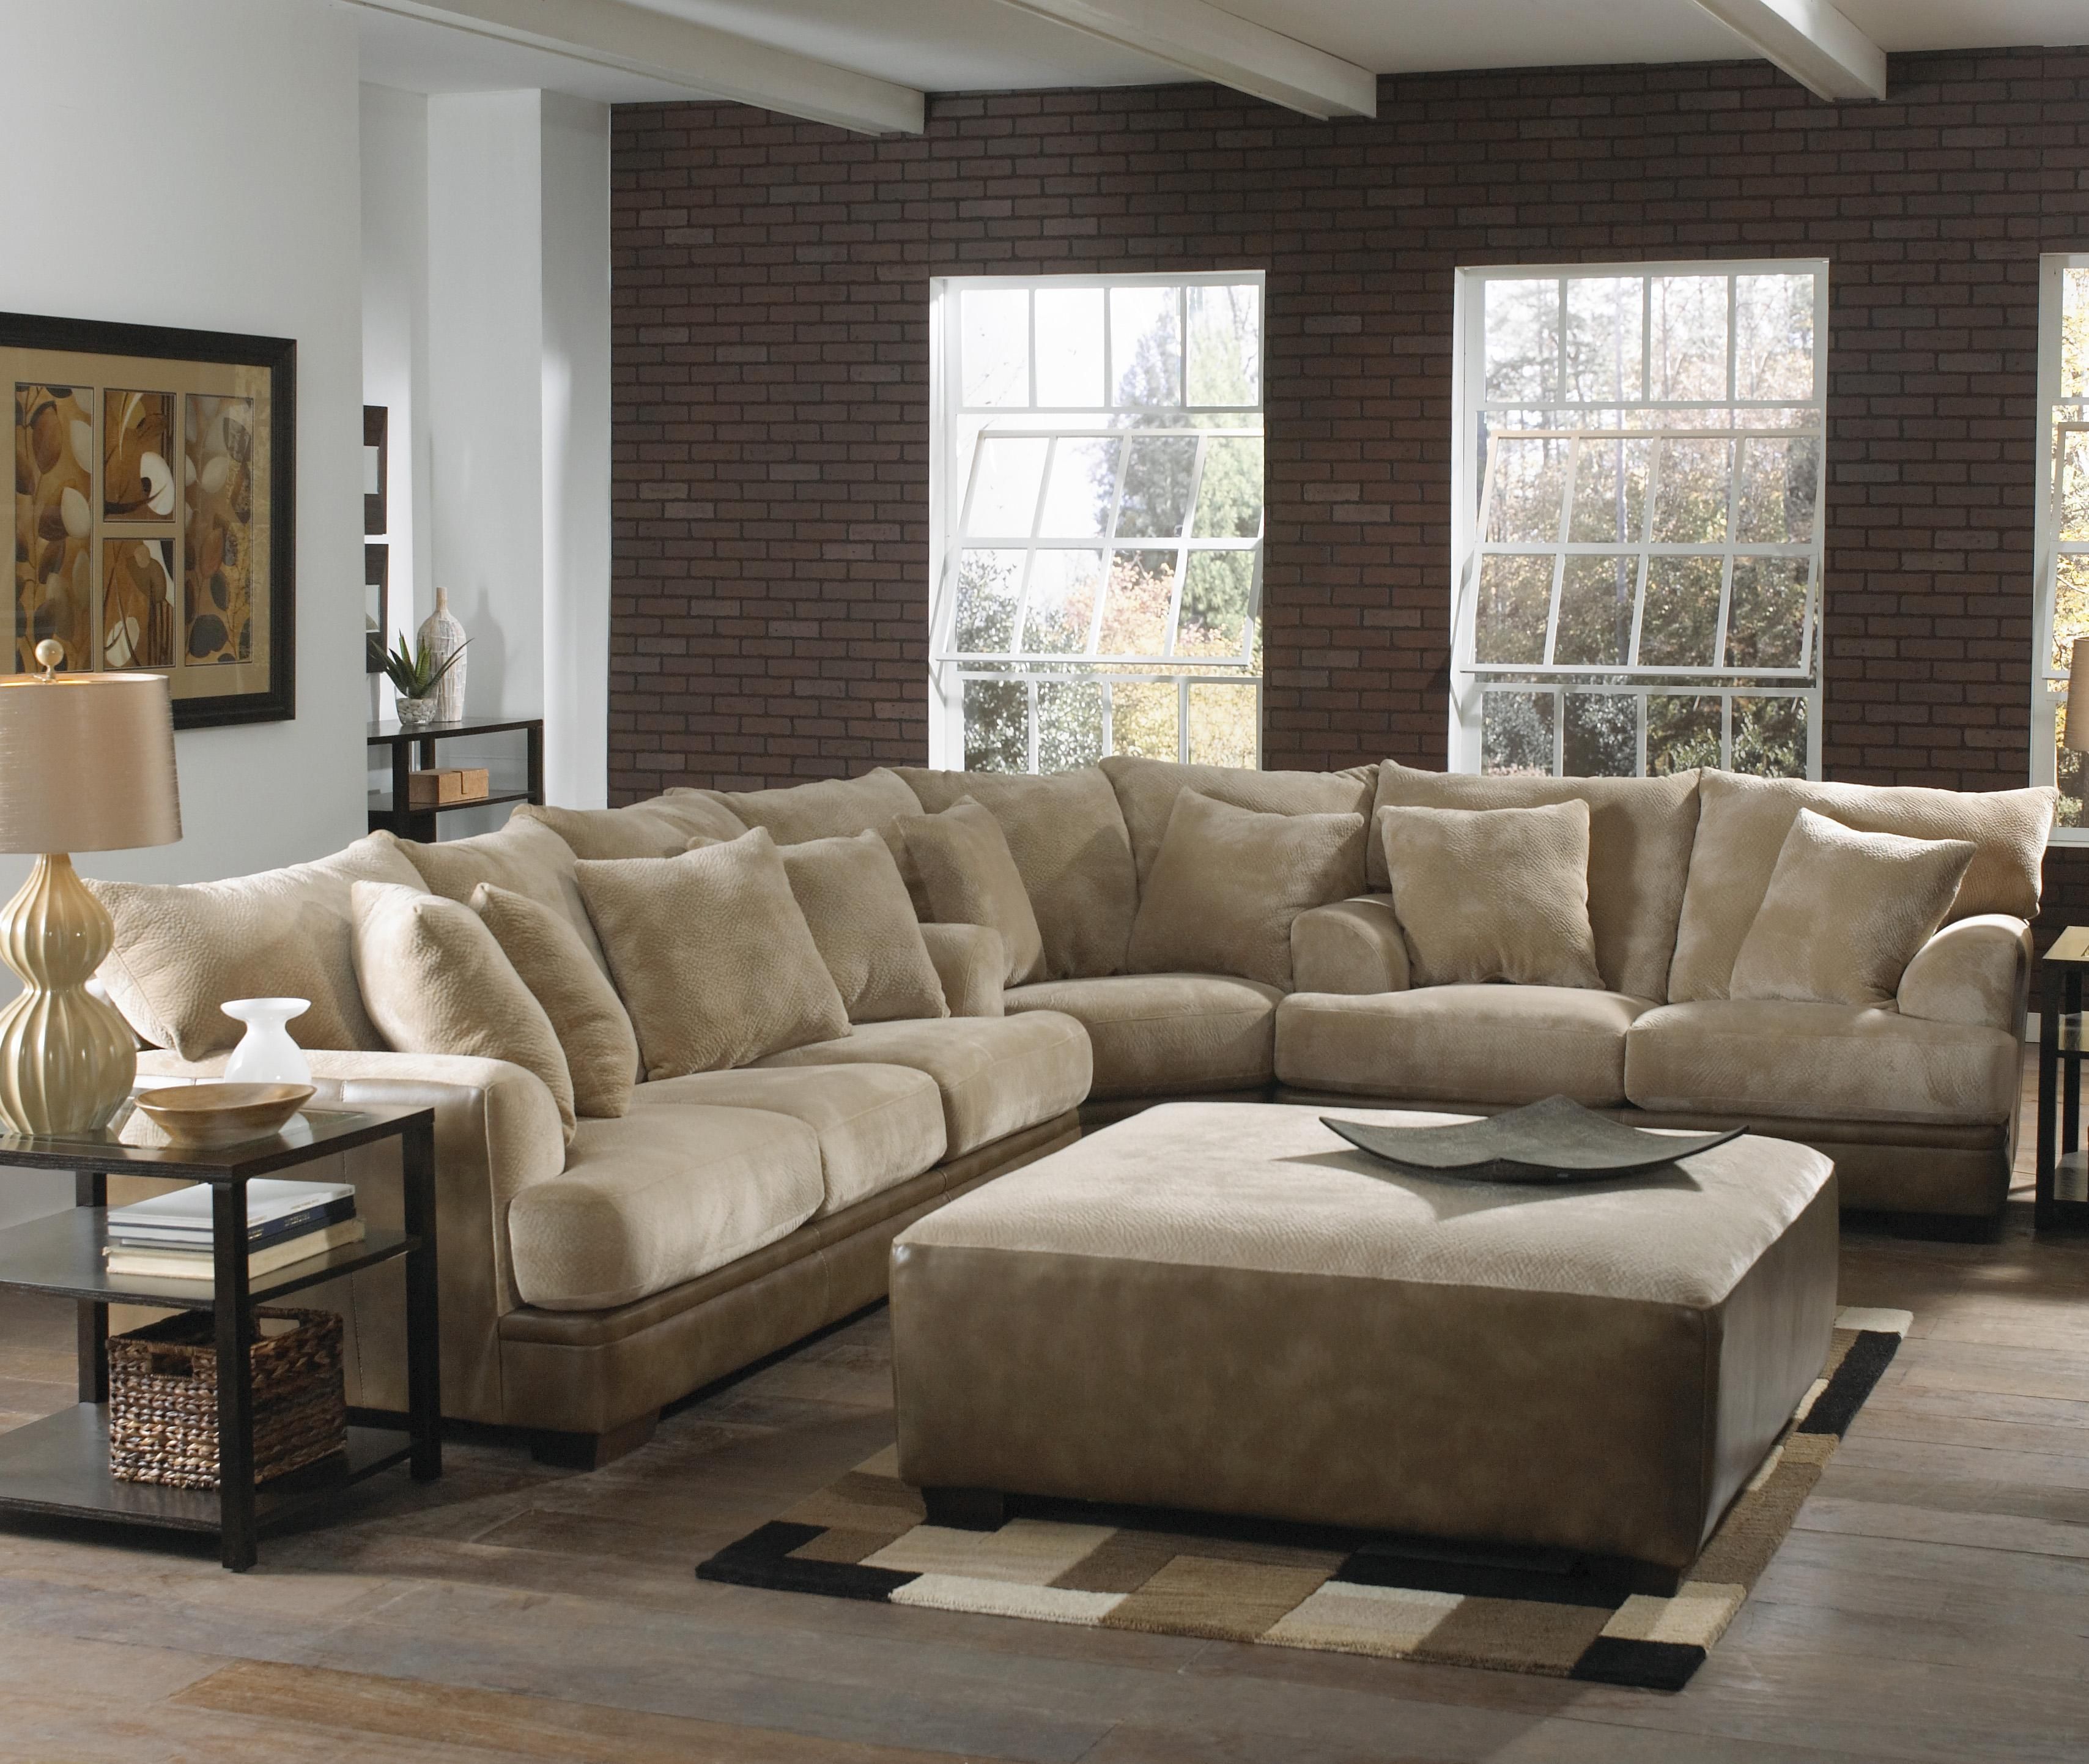 Barkley Large L Shaped Sectional Sofa With Right Side Loveseat Intended For 7 Seat Sectional Sofa (View 6 of 15)